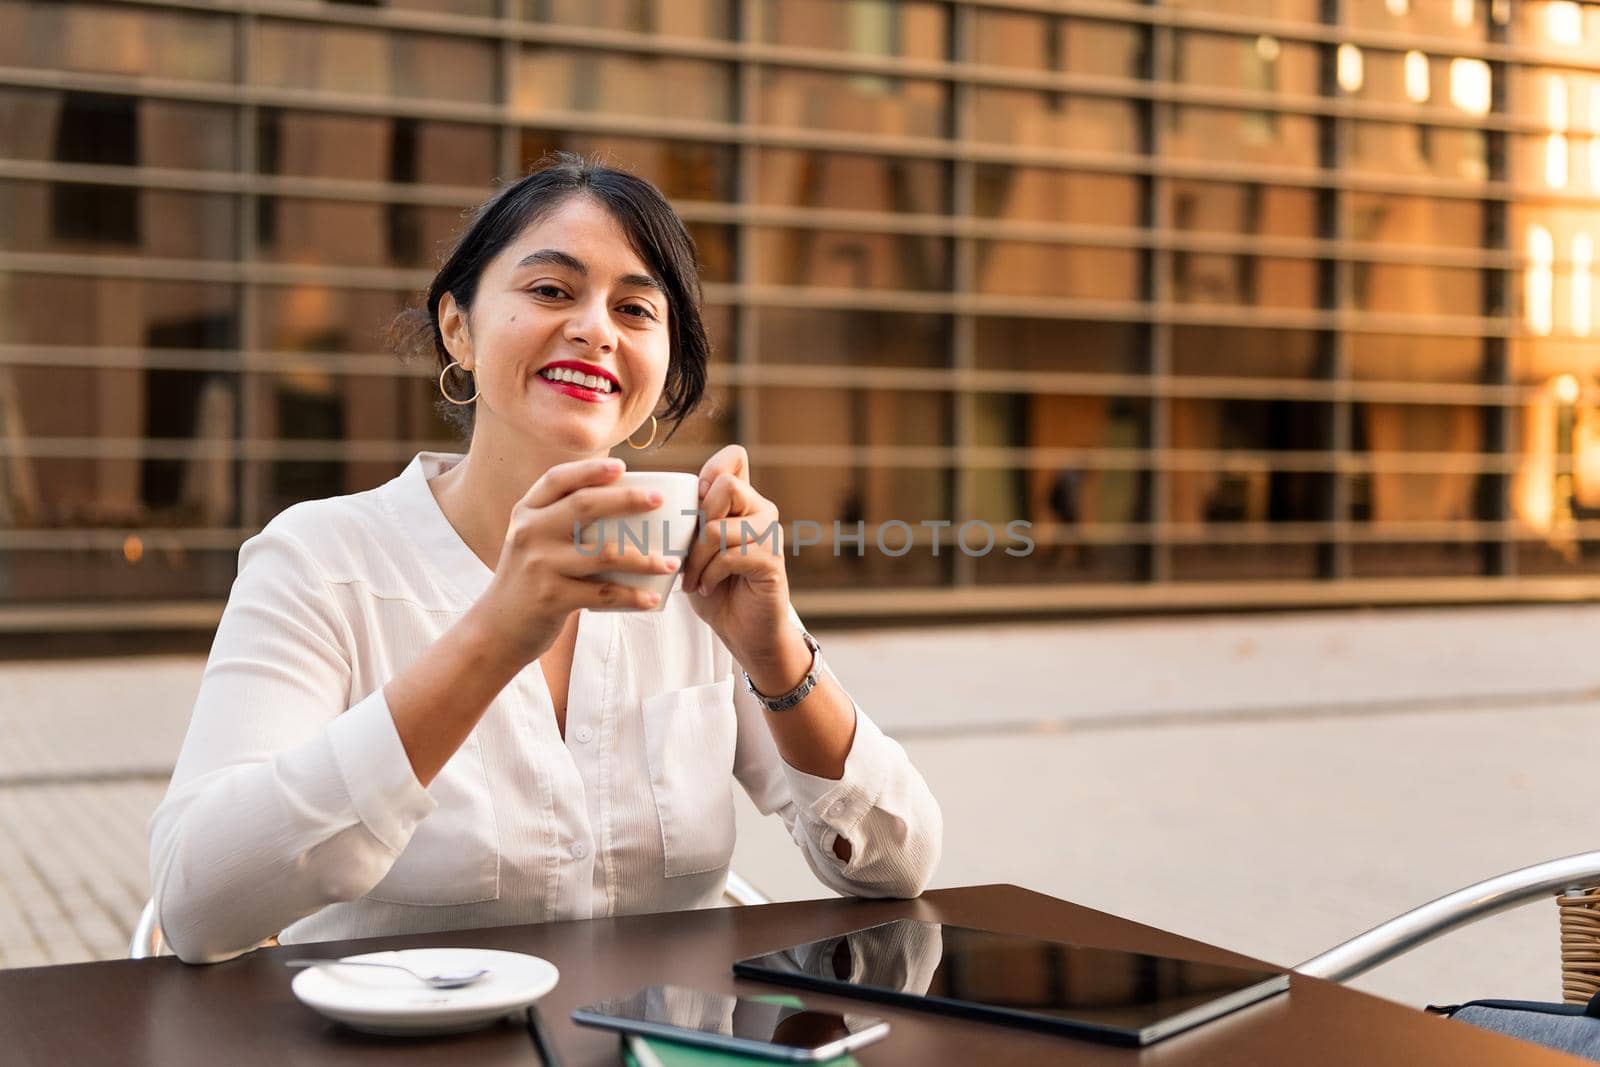 businesswoman smiling with a cup of coffee by raulmelldo